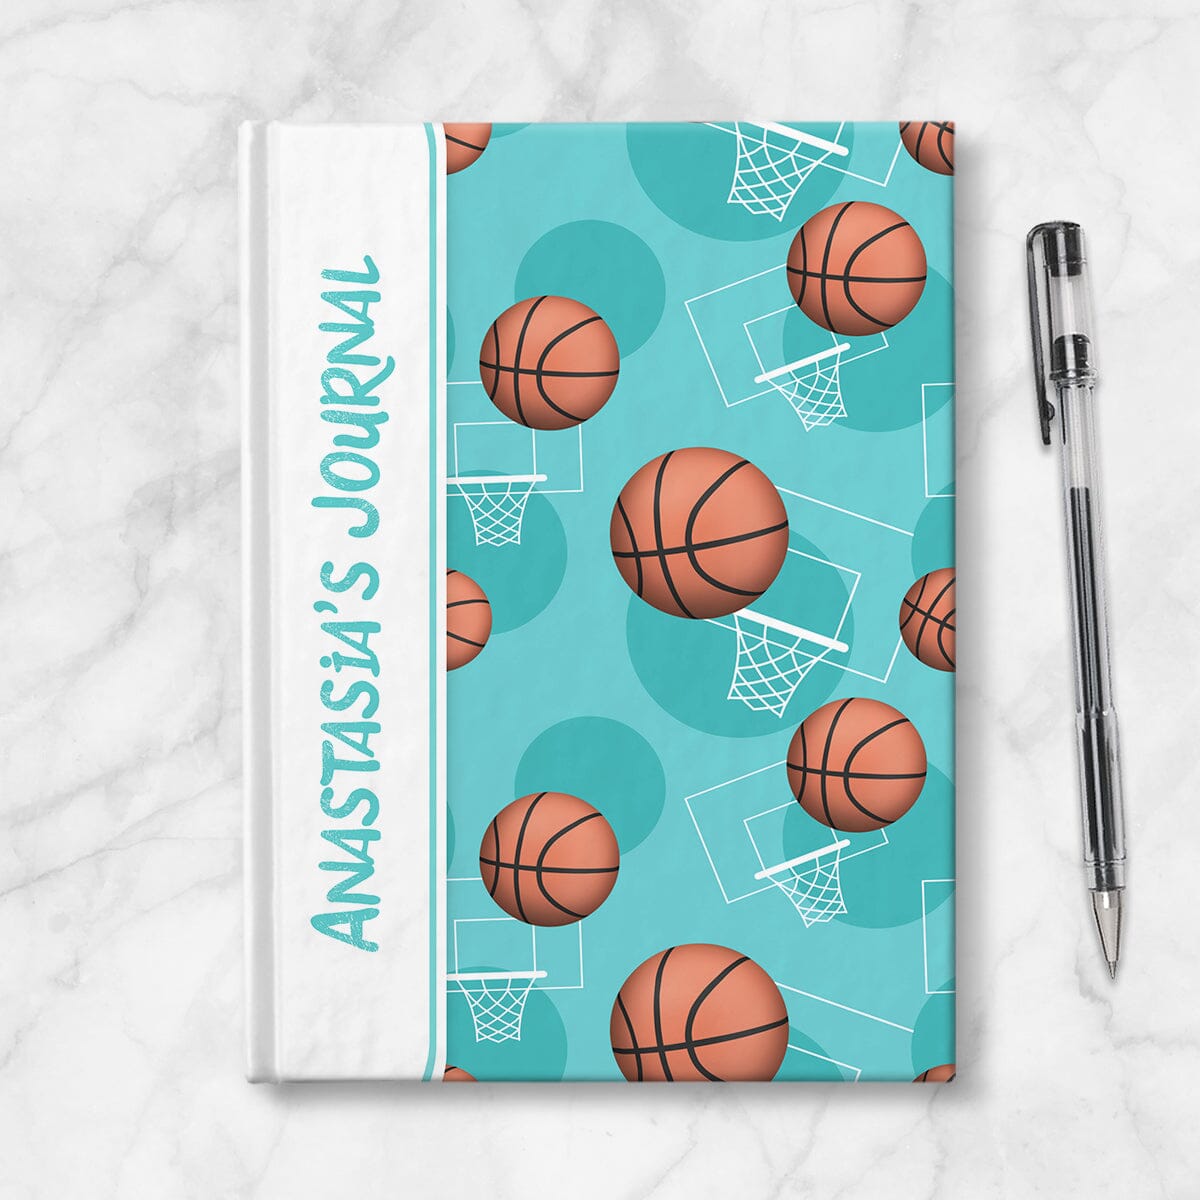 Personalized Teal Basketball Journal at Artistically Invited. Image shows the book on a countertop next to a pen.